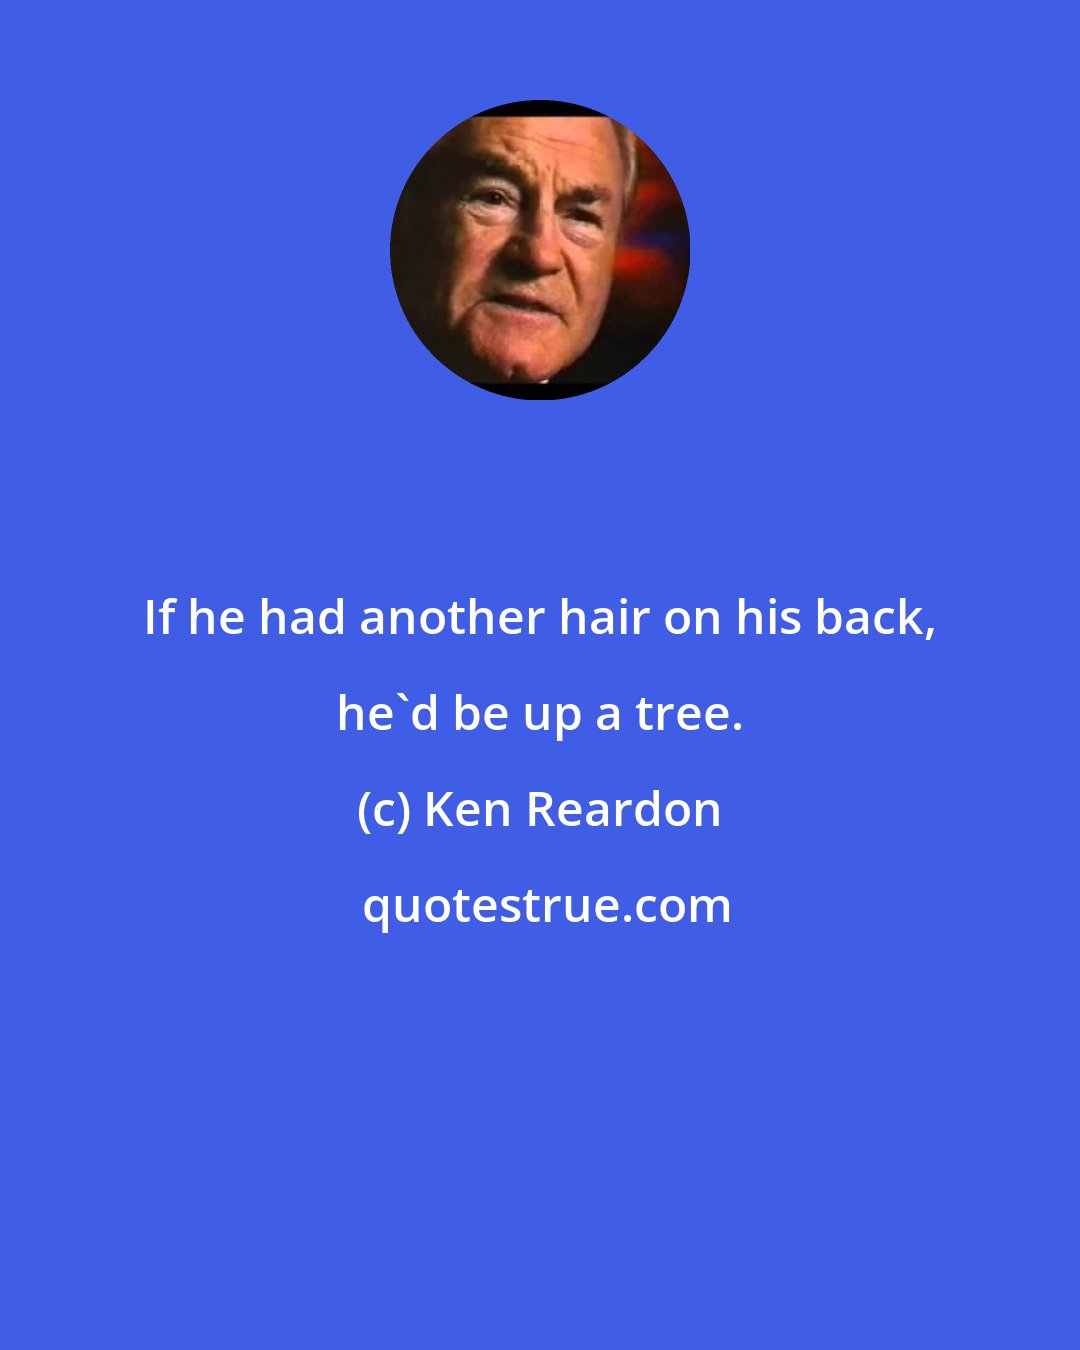 Ken Reardon: If he had another hair on his back, he'd be up a tree.